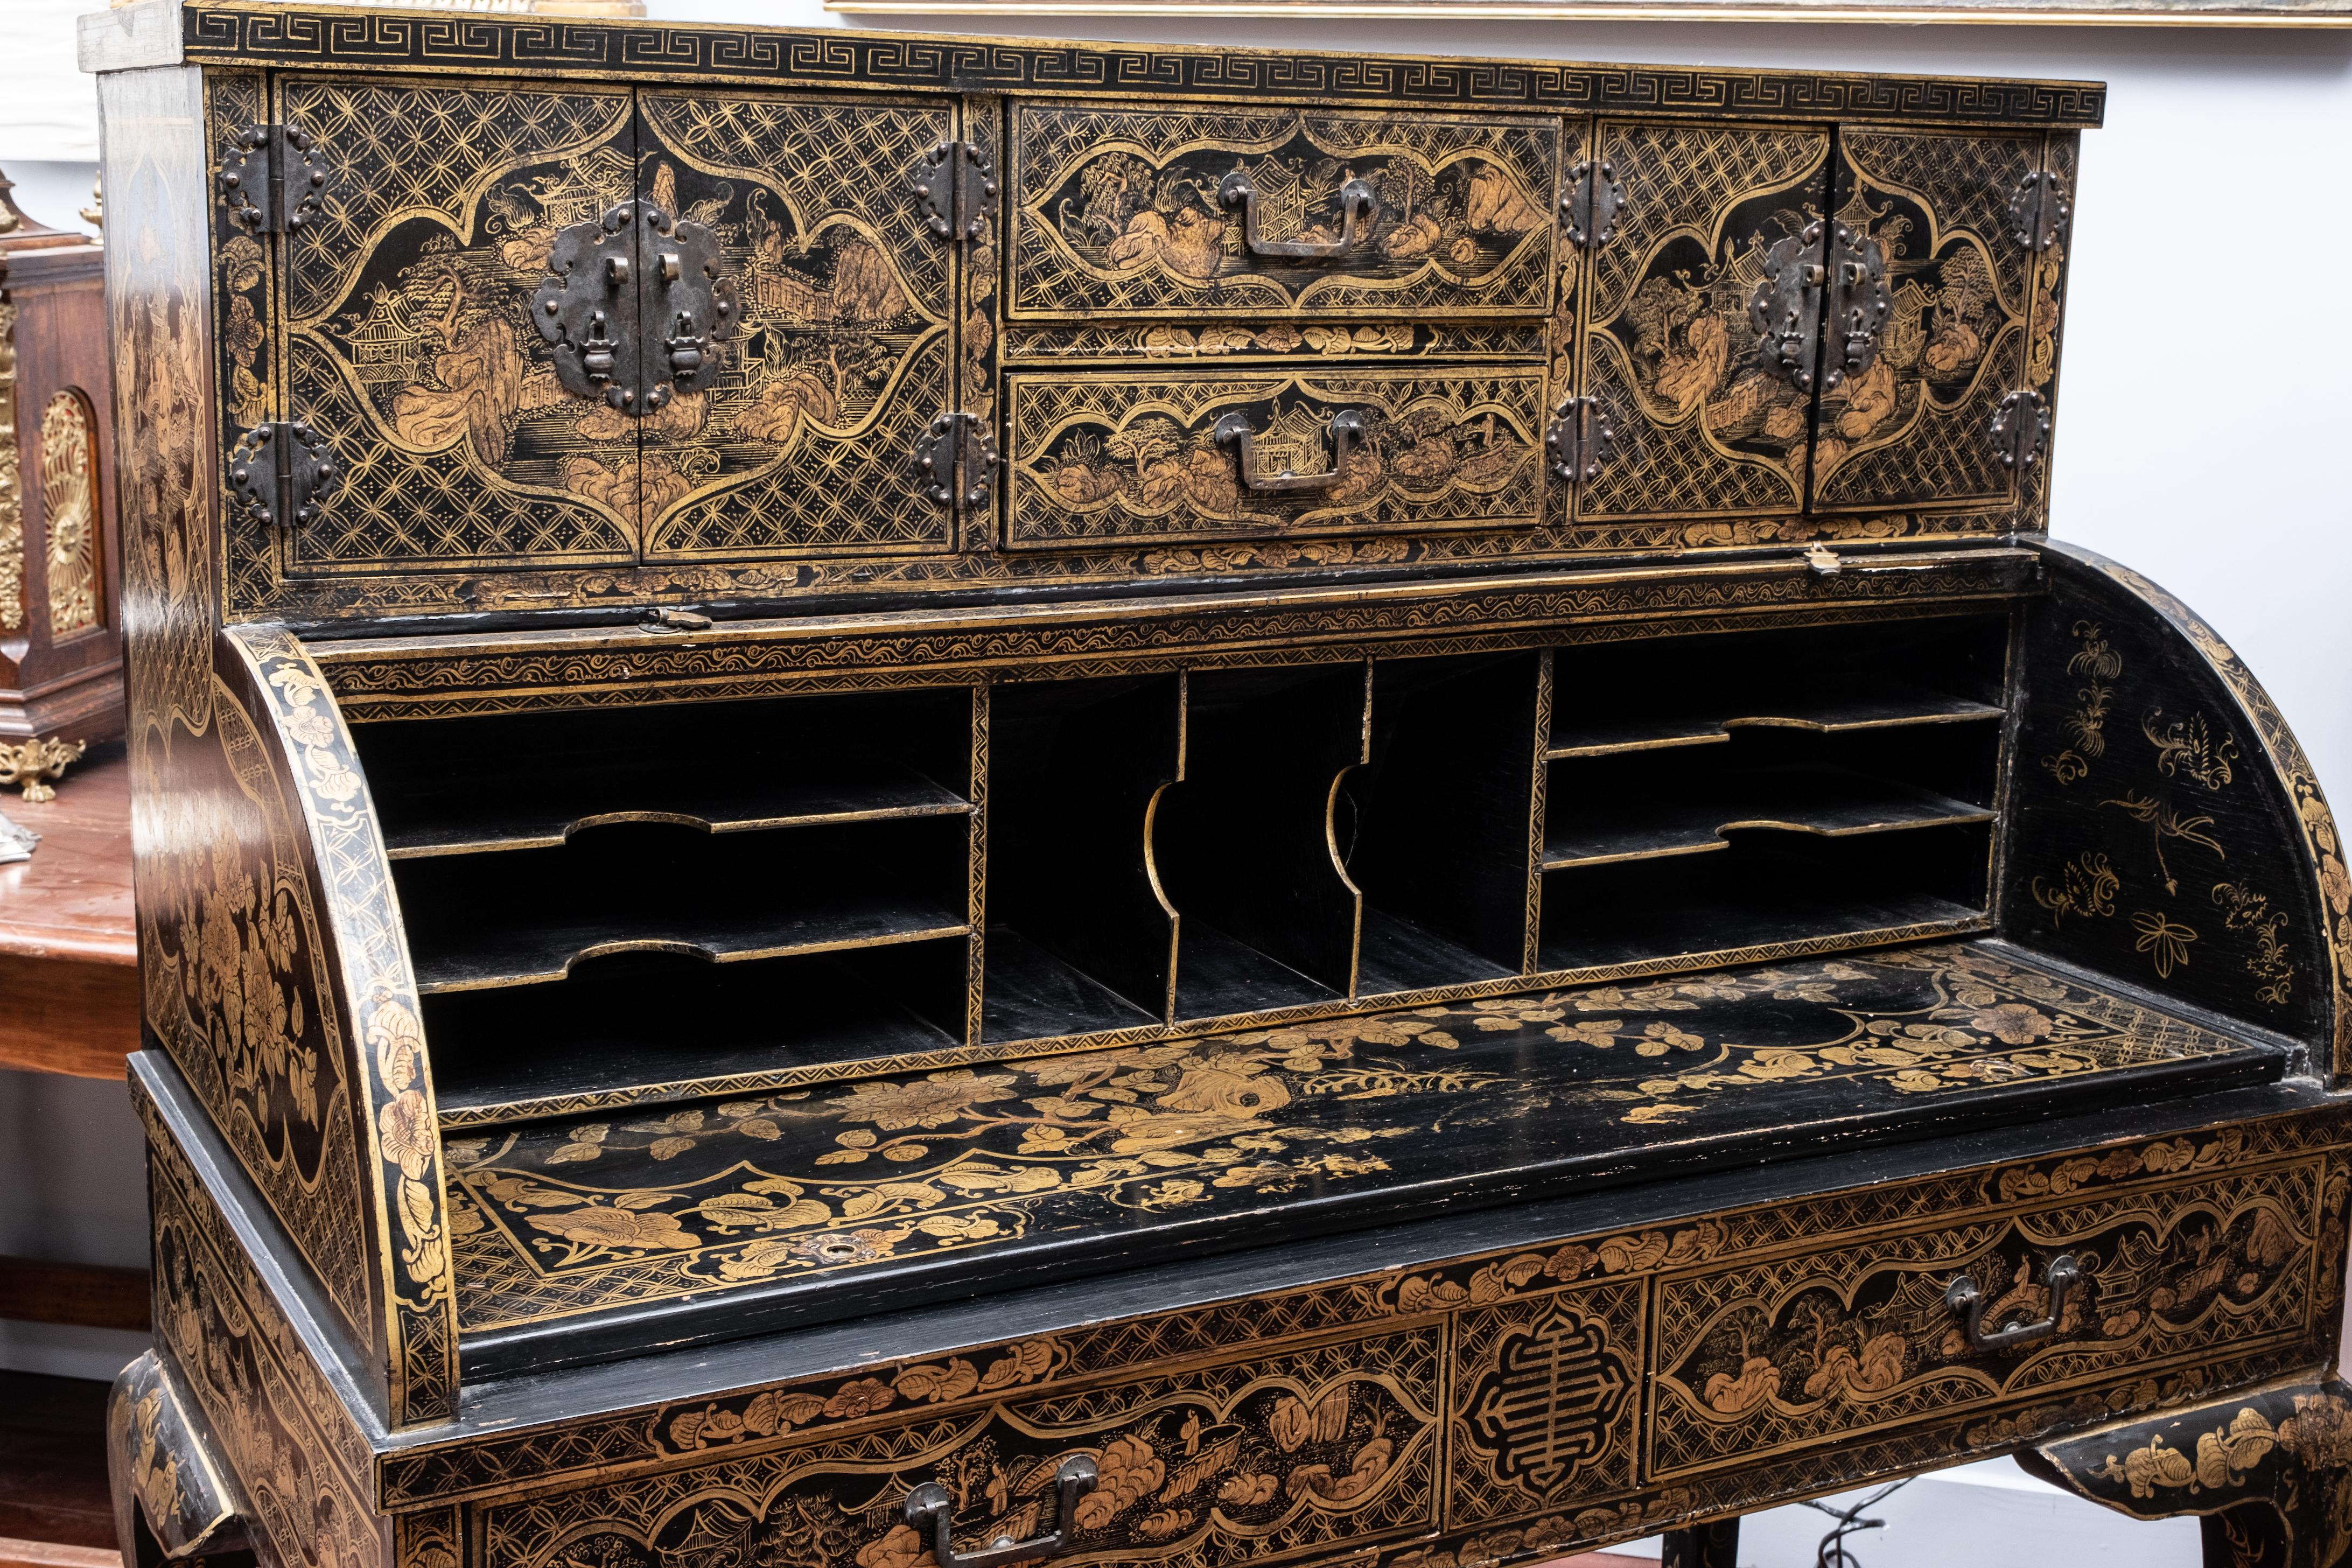 Chinese export gilt black lacquer desk with a cylinder roll top supported on cabriole legs together with a related lacquer chair. The desk is hand painted with calligraphy and images. the translation of the calligraphy seemingly relates to the